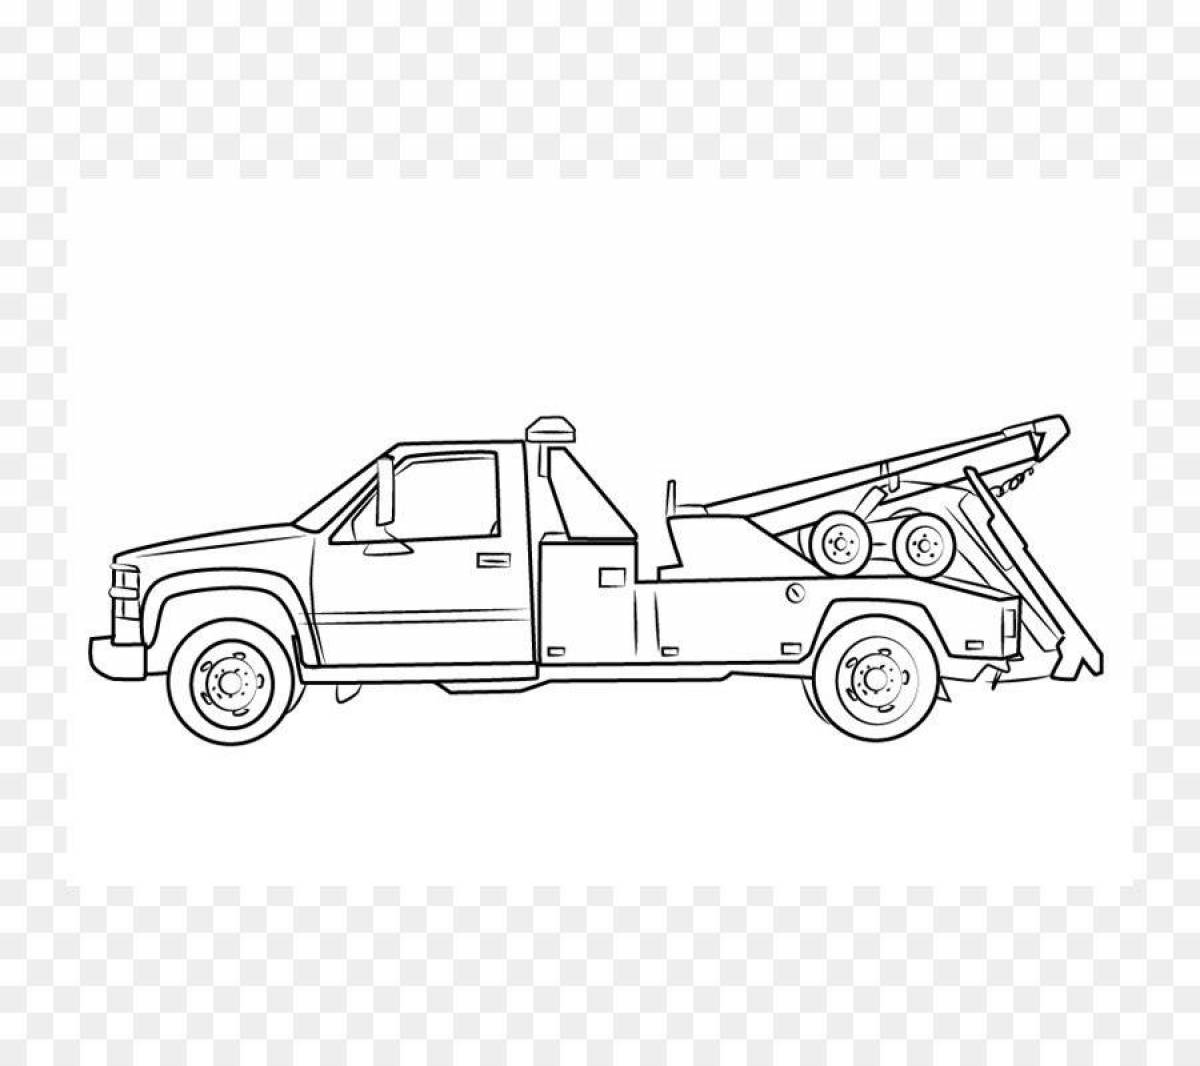 Hip tow truck coloring page